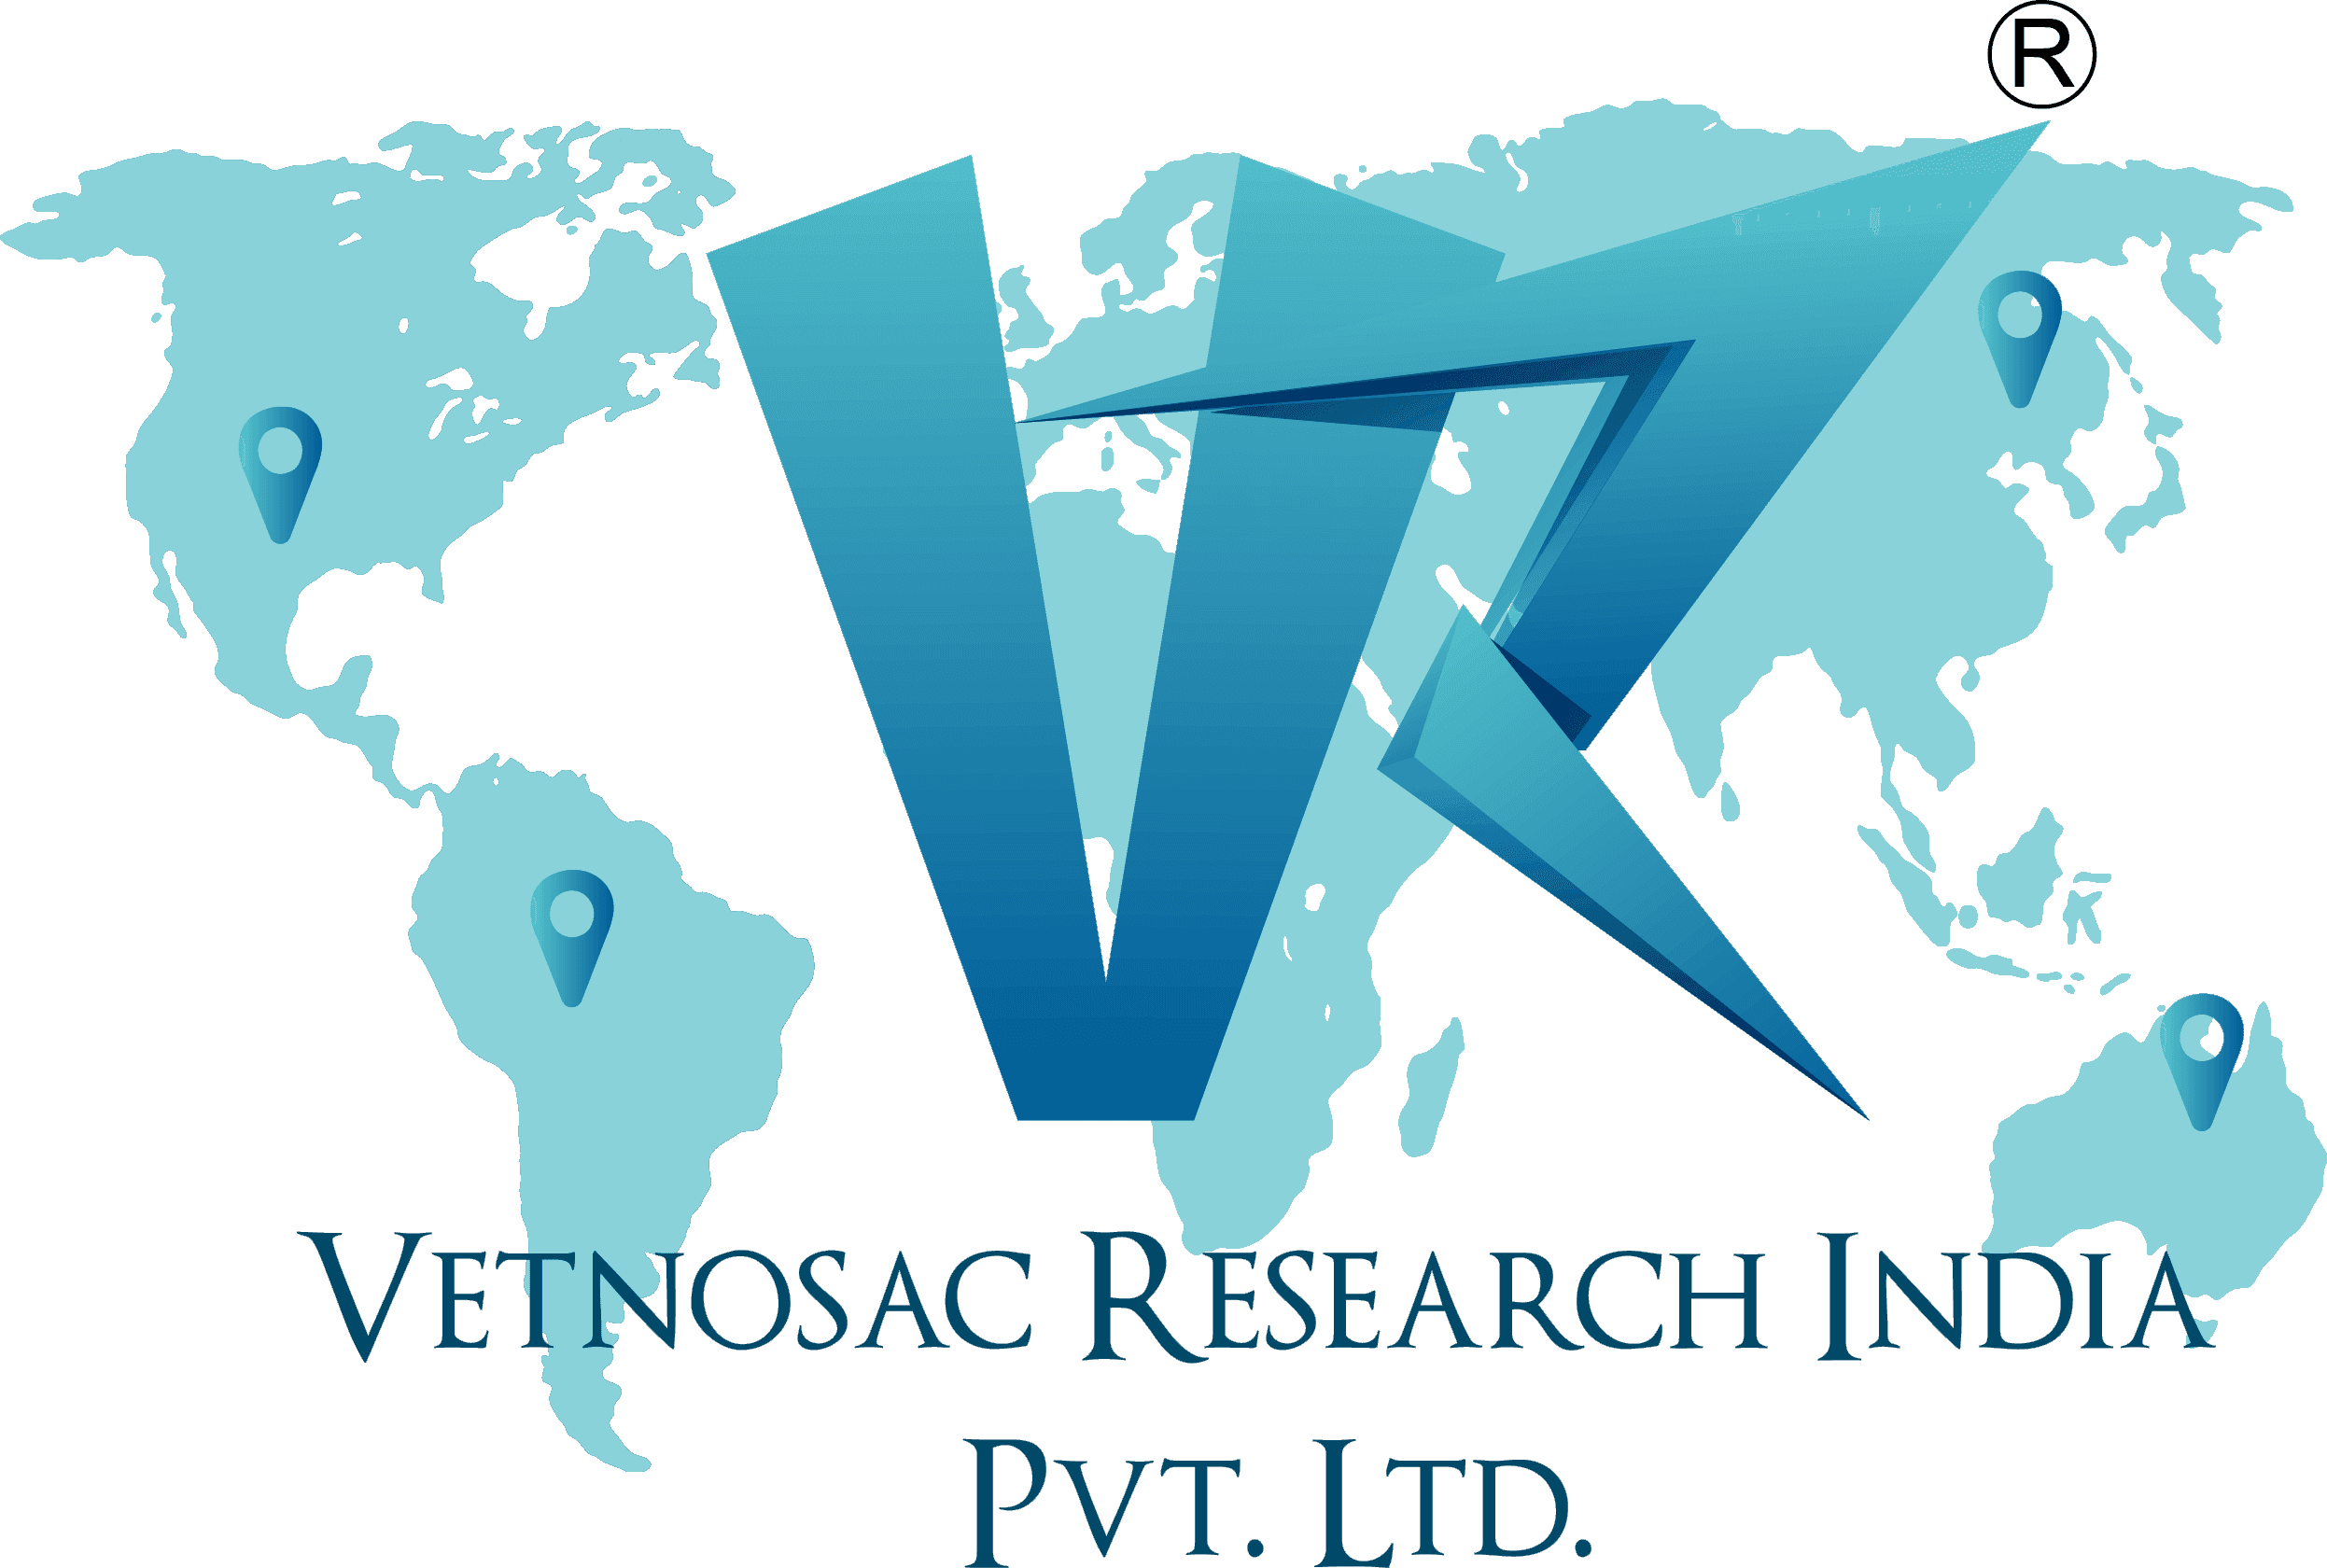 VETNOSAC RESEARCH INDIA PRIVATE LIMITED